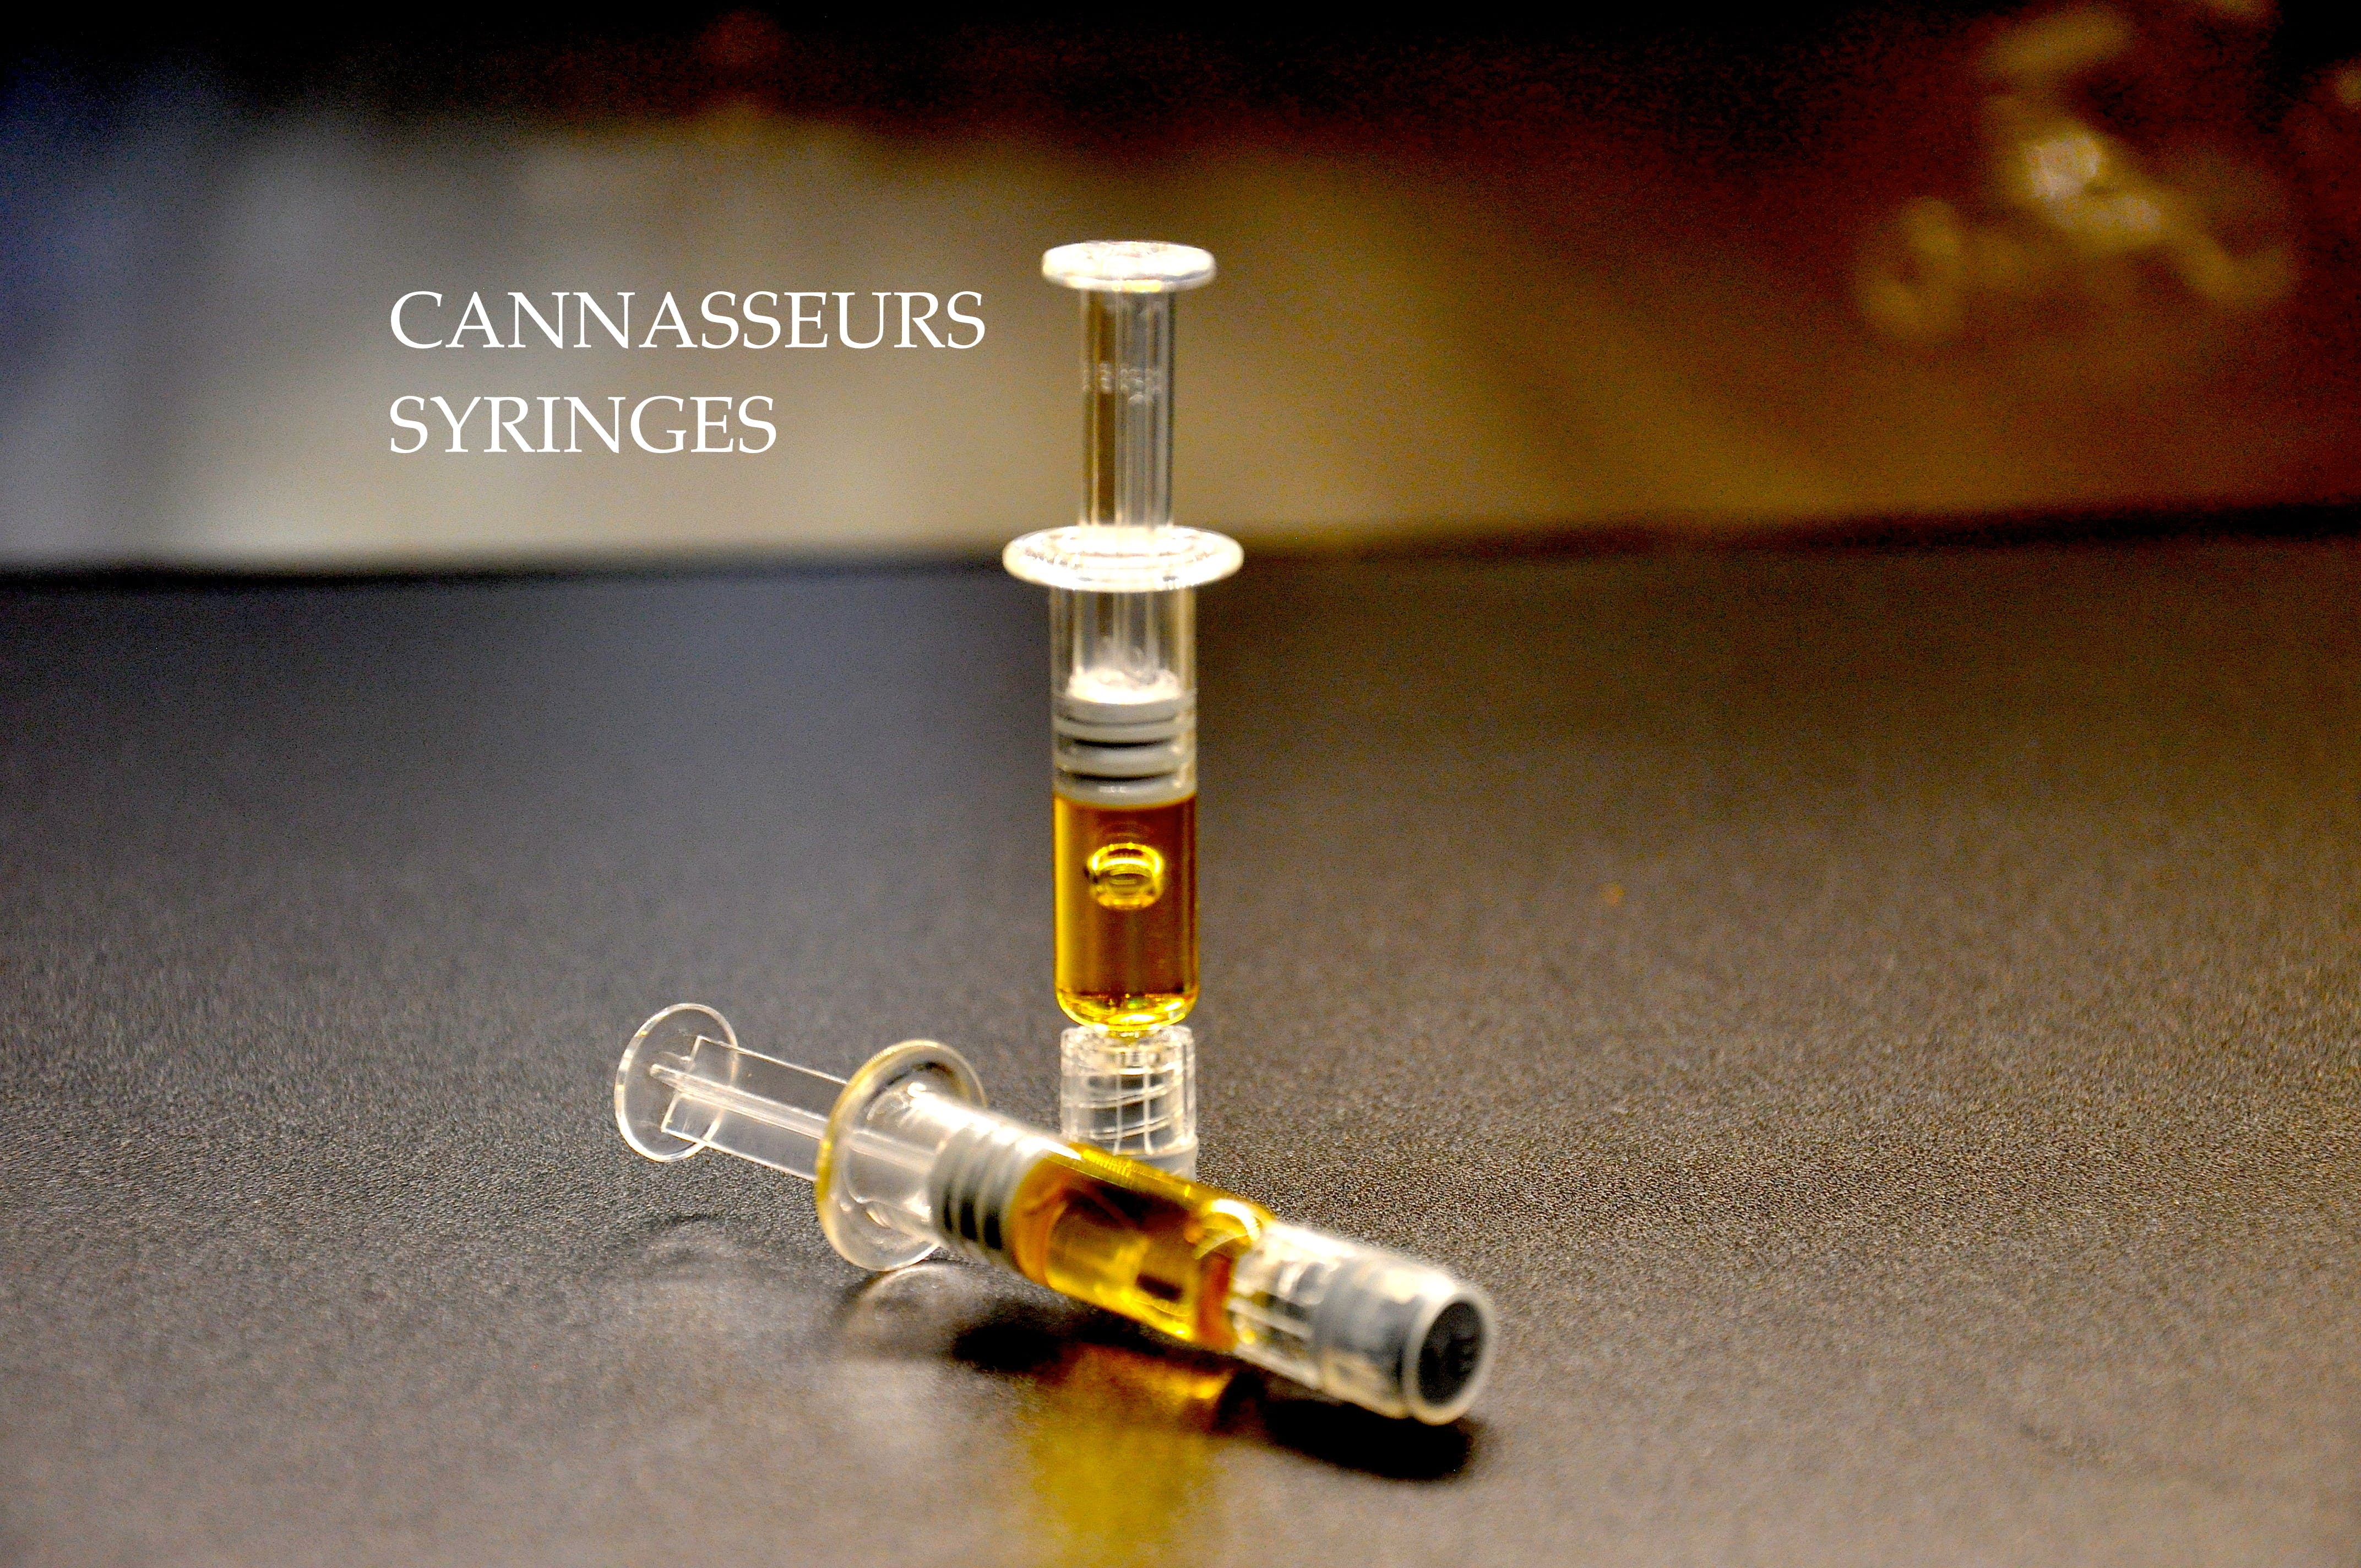 concentrate-cannasseurs-syringes-1g-96-25